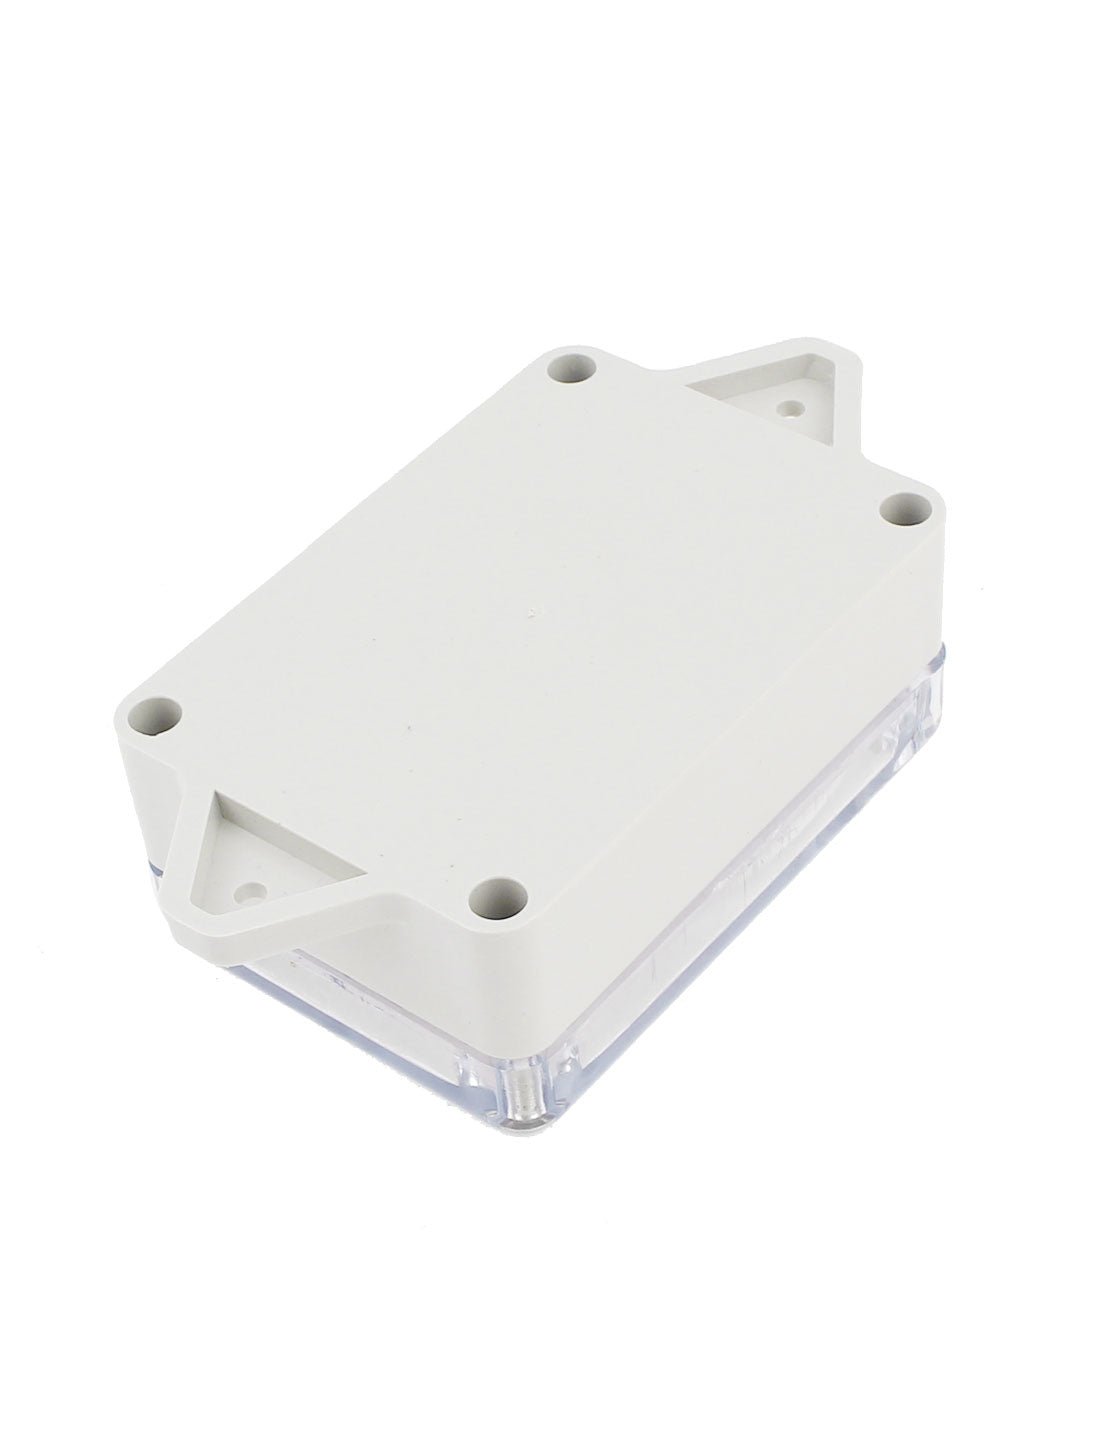 uxcell Uxcell 83mm x 58mm x 33mm Dustproof IP65 Plastic DIY Junction Box Power Protection Case